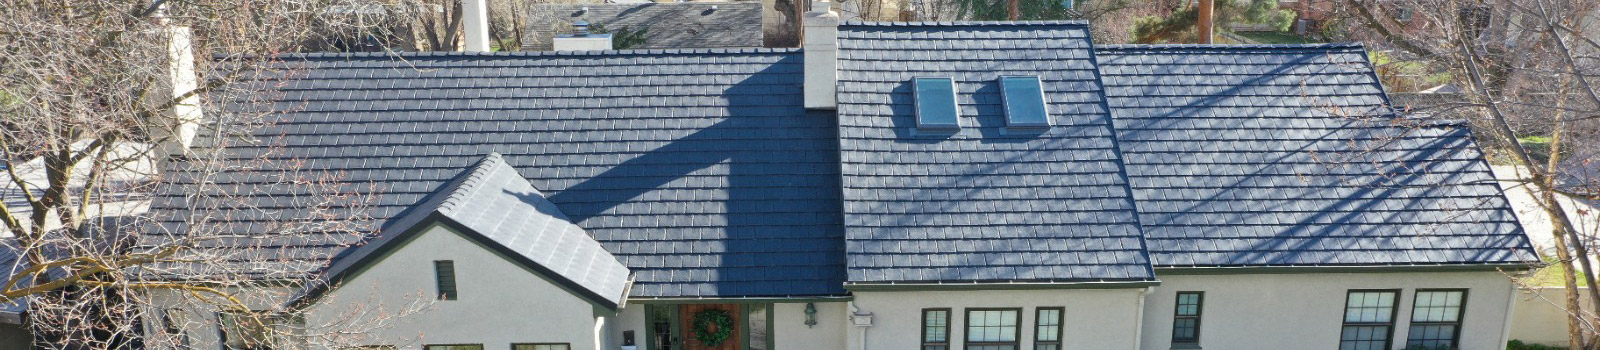 Synthetic Roofing For Idaho Homes